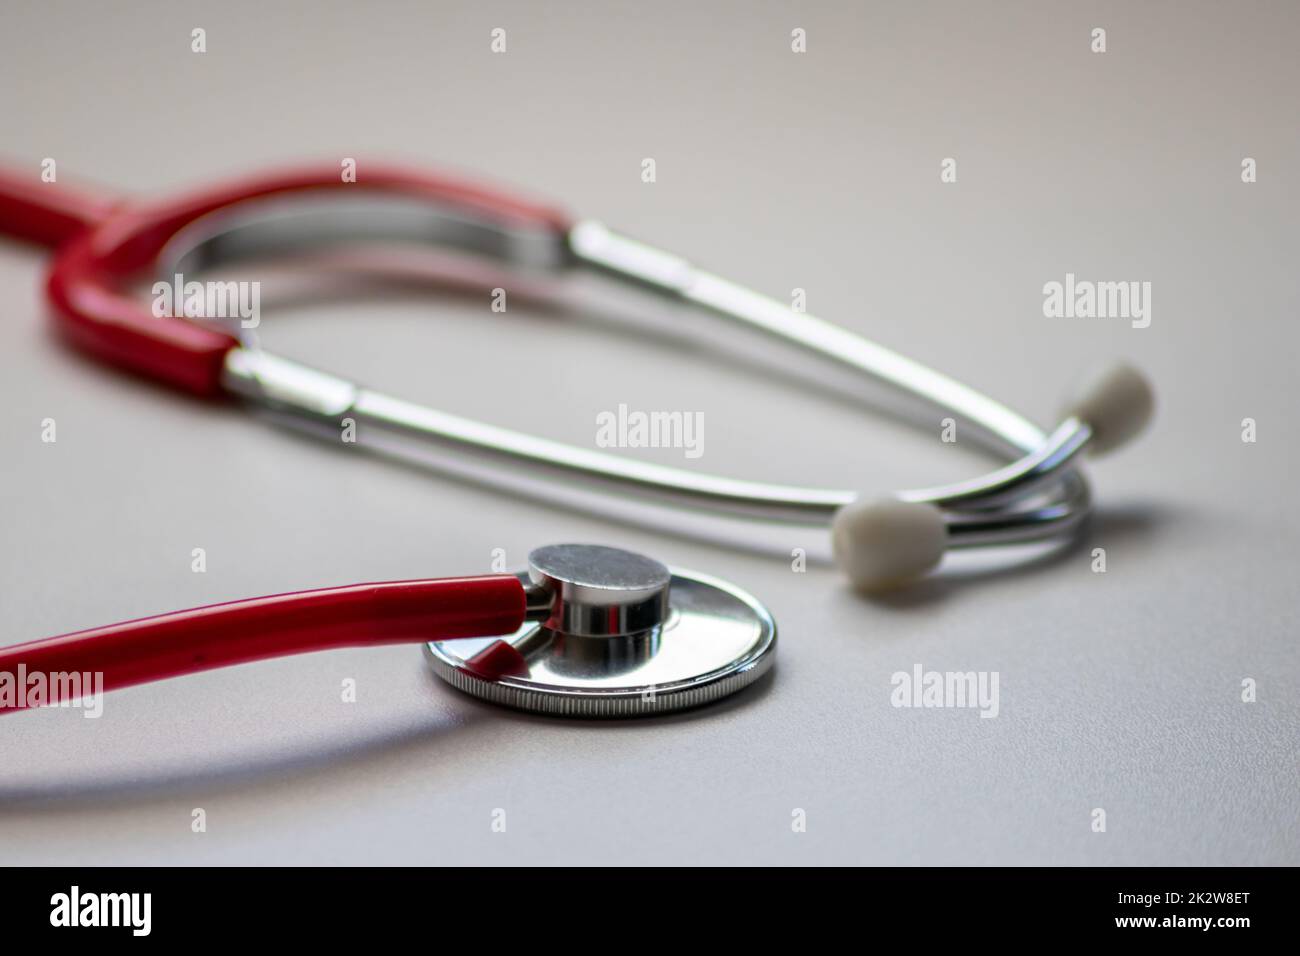 Red stethoscope in doctors office for professional cardio checkup and healthy heartbeat pulse check by cardiologist in clinical treatment room on white desk as medical equipment to measure body params Stock Photo